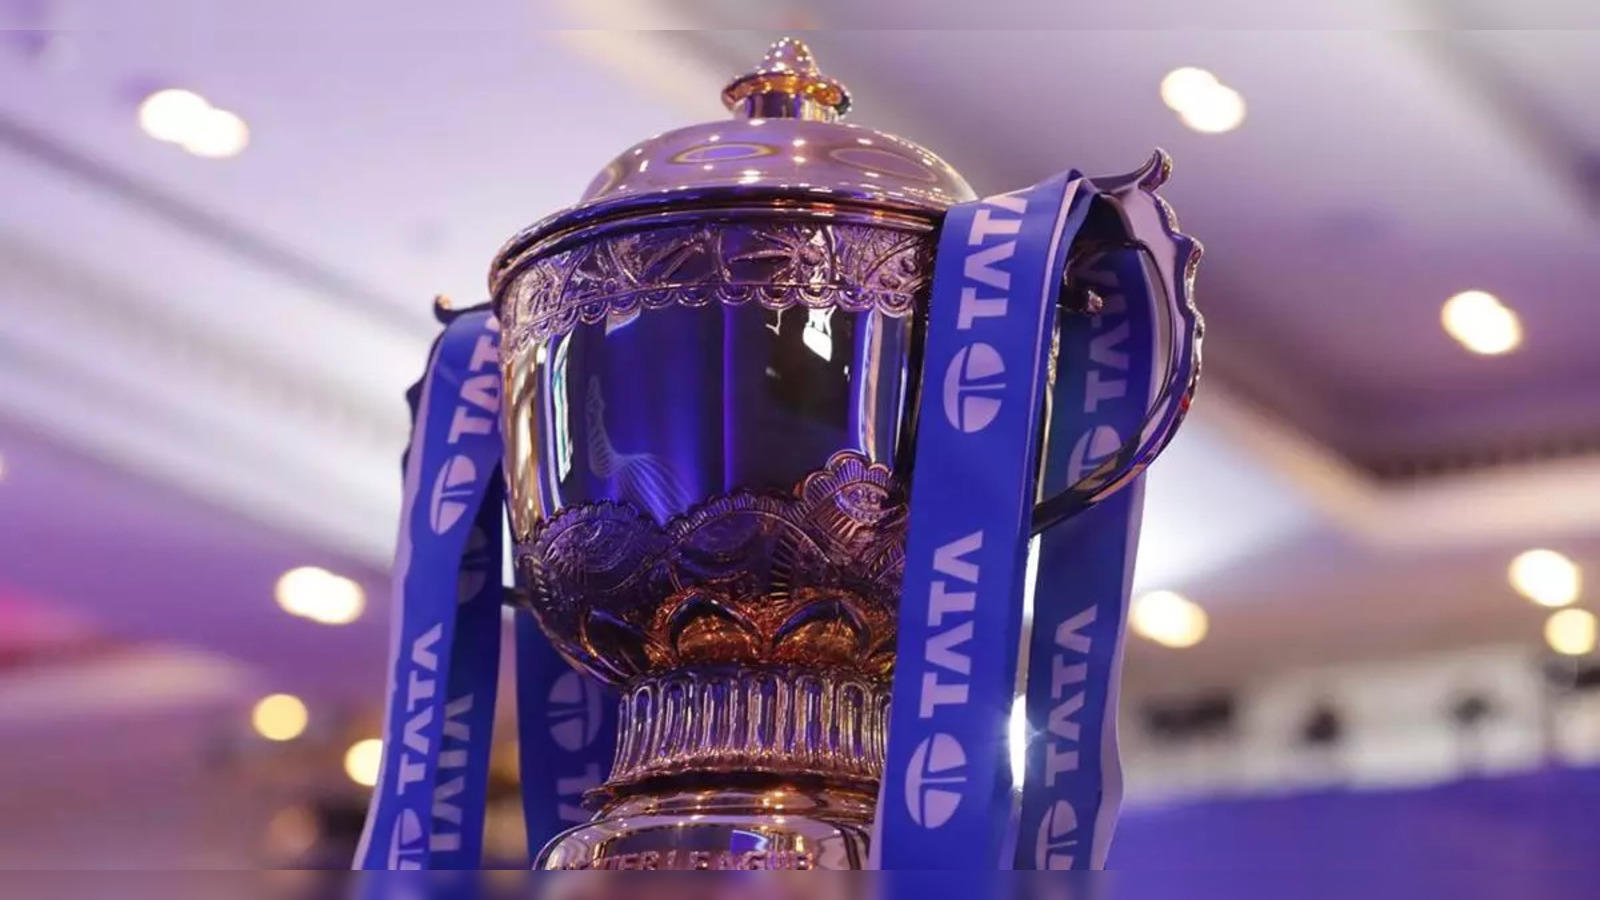 IPL Auction 2021: Here's the full list of all teams with available slots  and remaining purse | coastaldigest.com - The Trusted News Portal of India